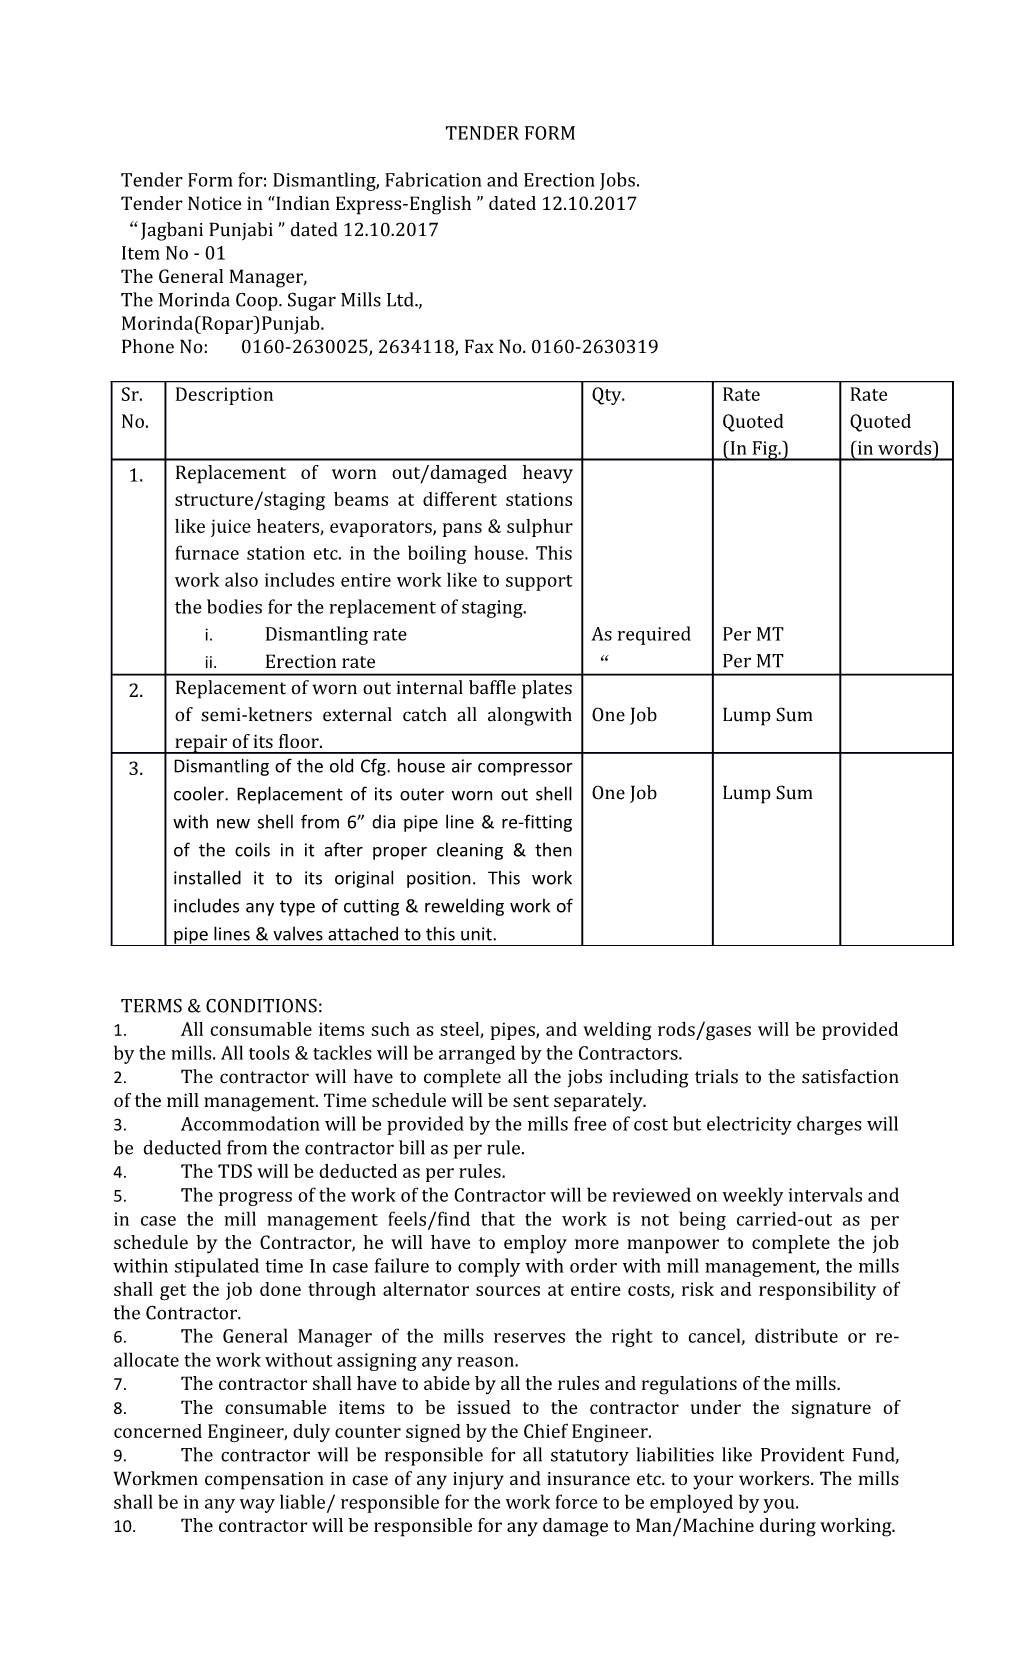 Tender Form For: Dismantling, Fabrication and Erection Jobs